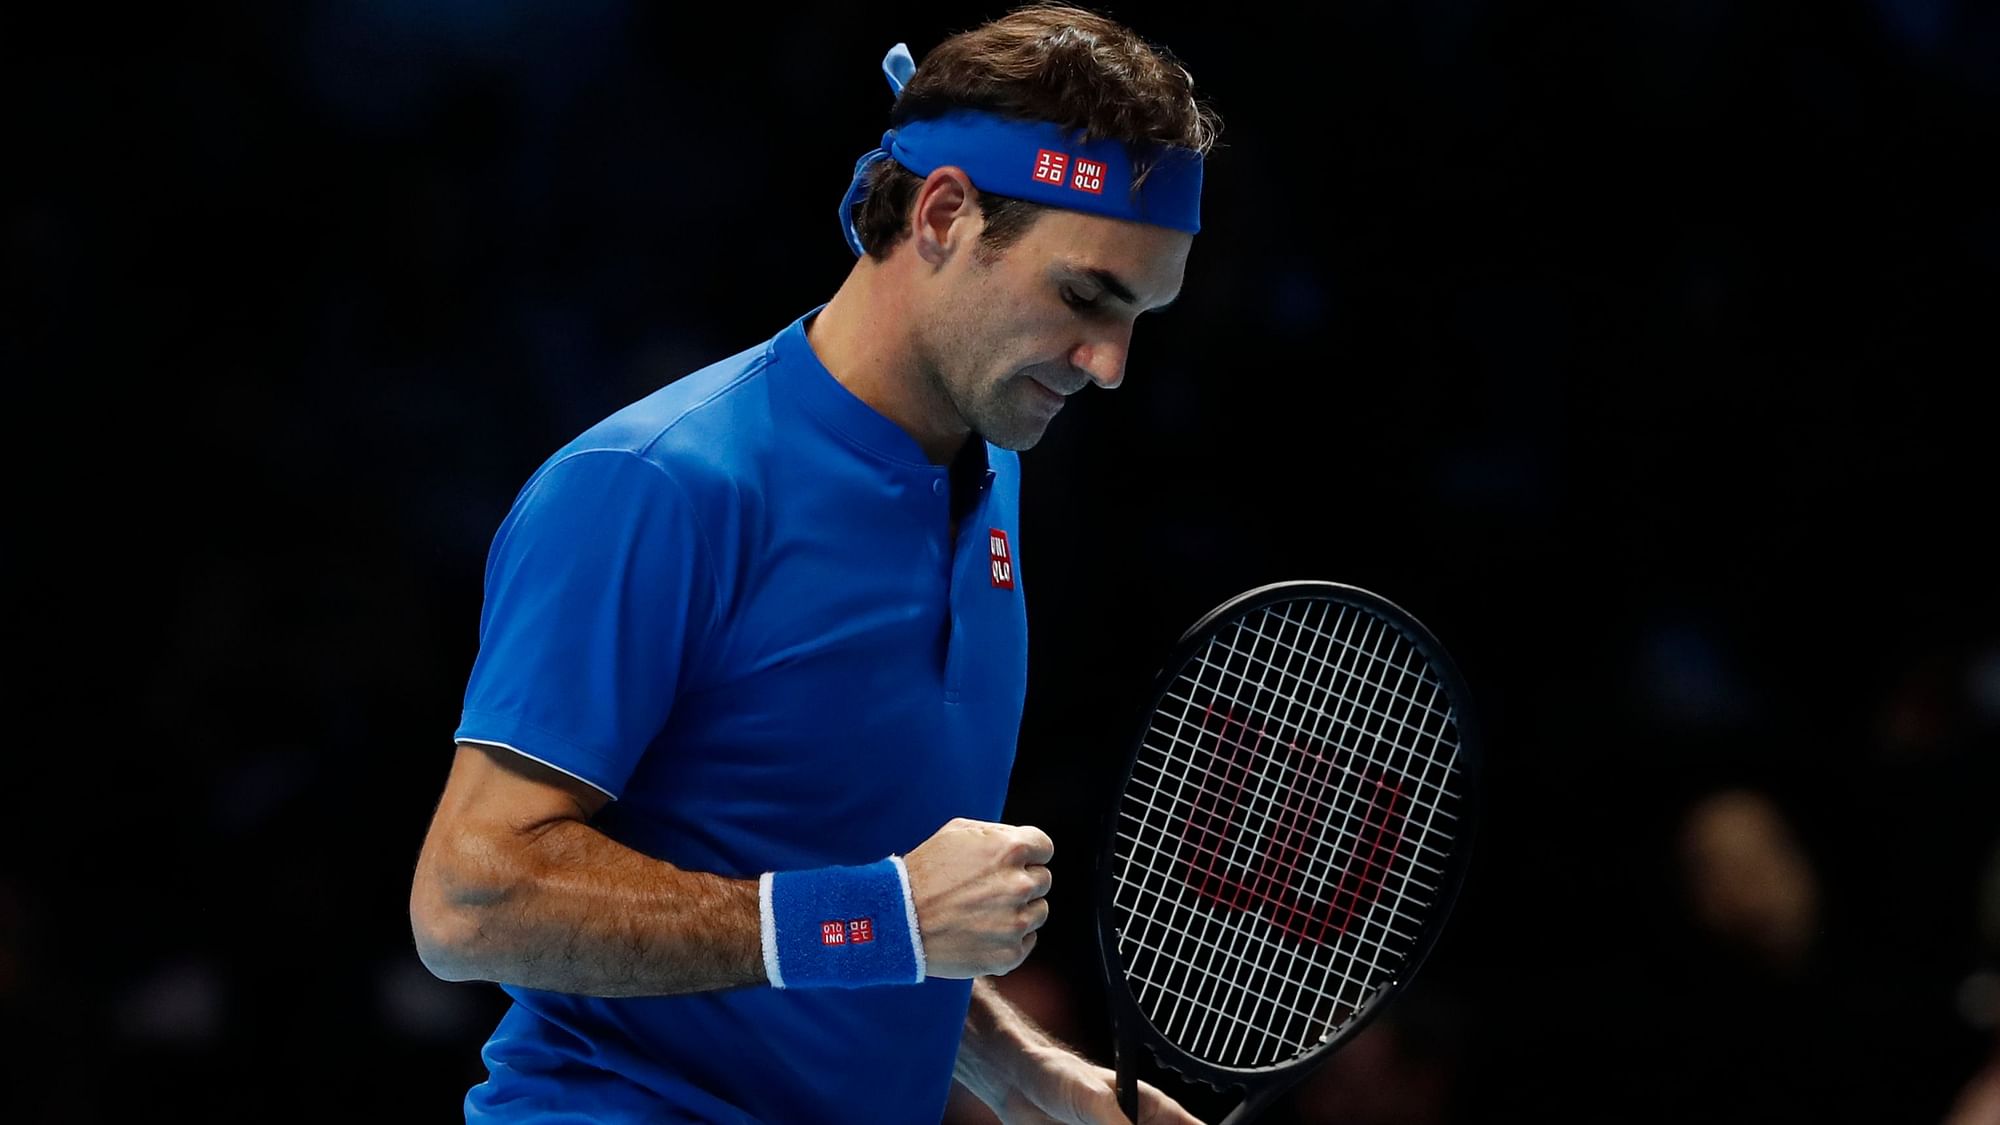 Roger Federer celebrates a point during his win over Dominic Thiem at the ATP Finals